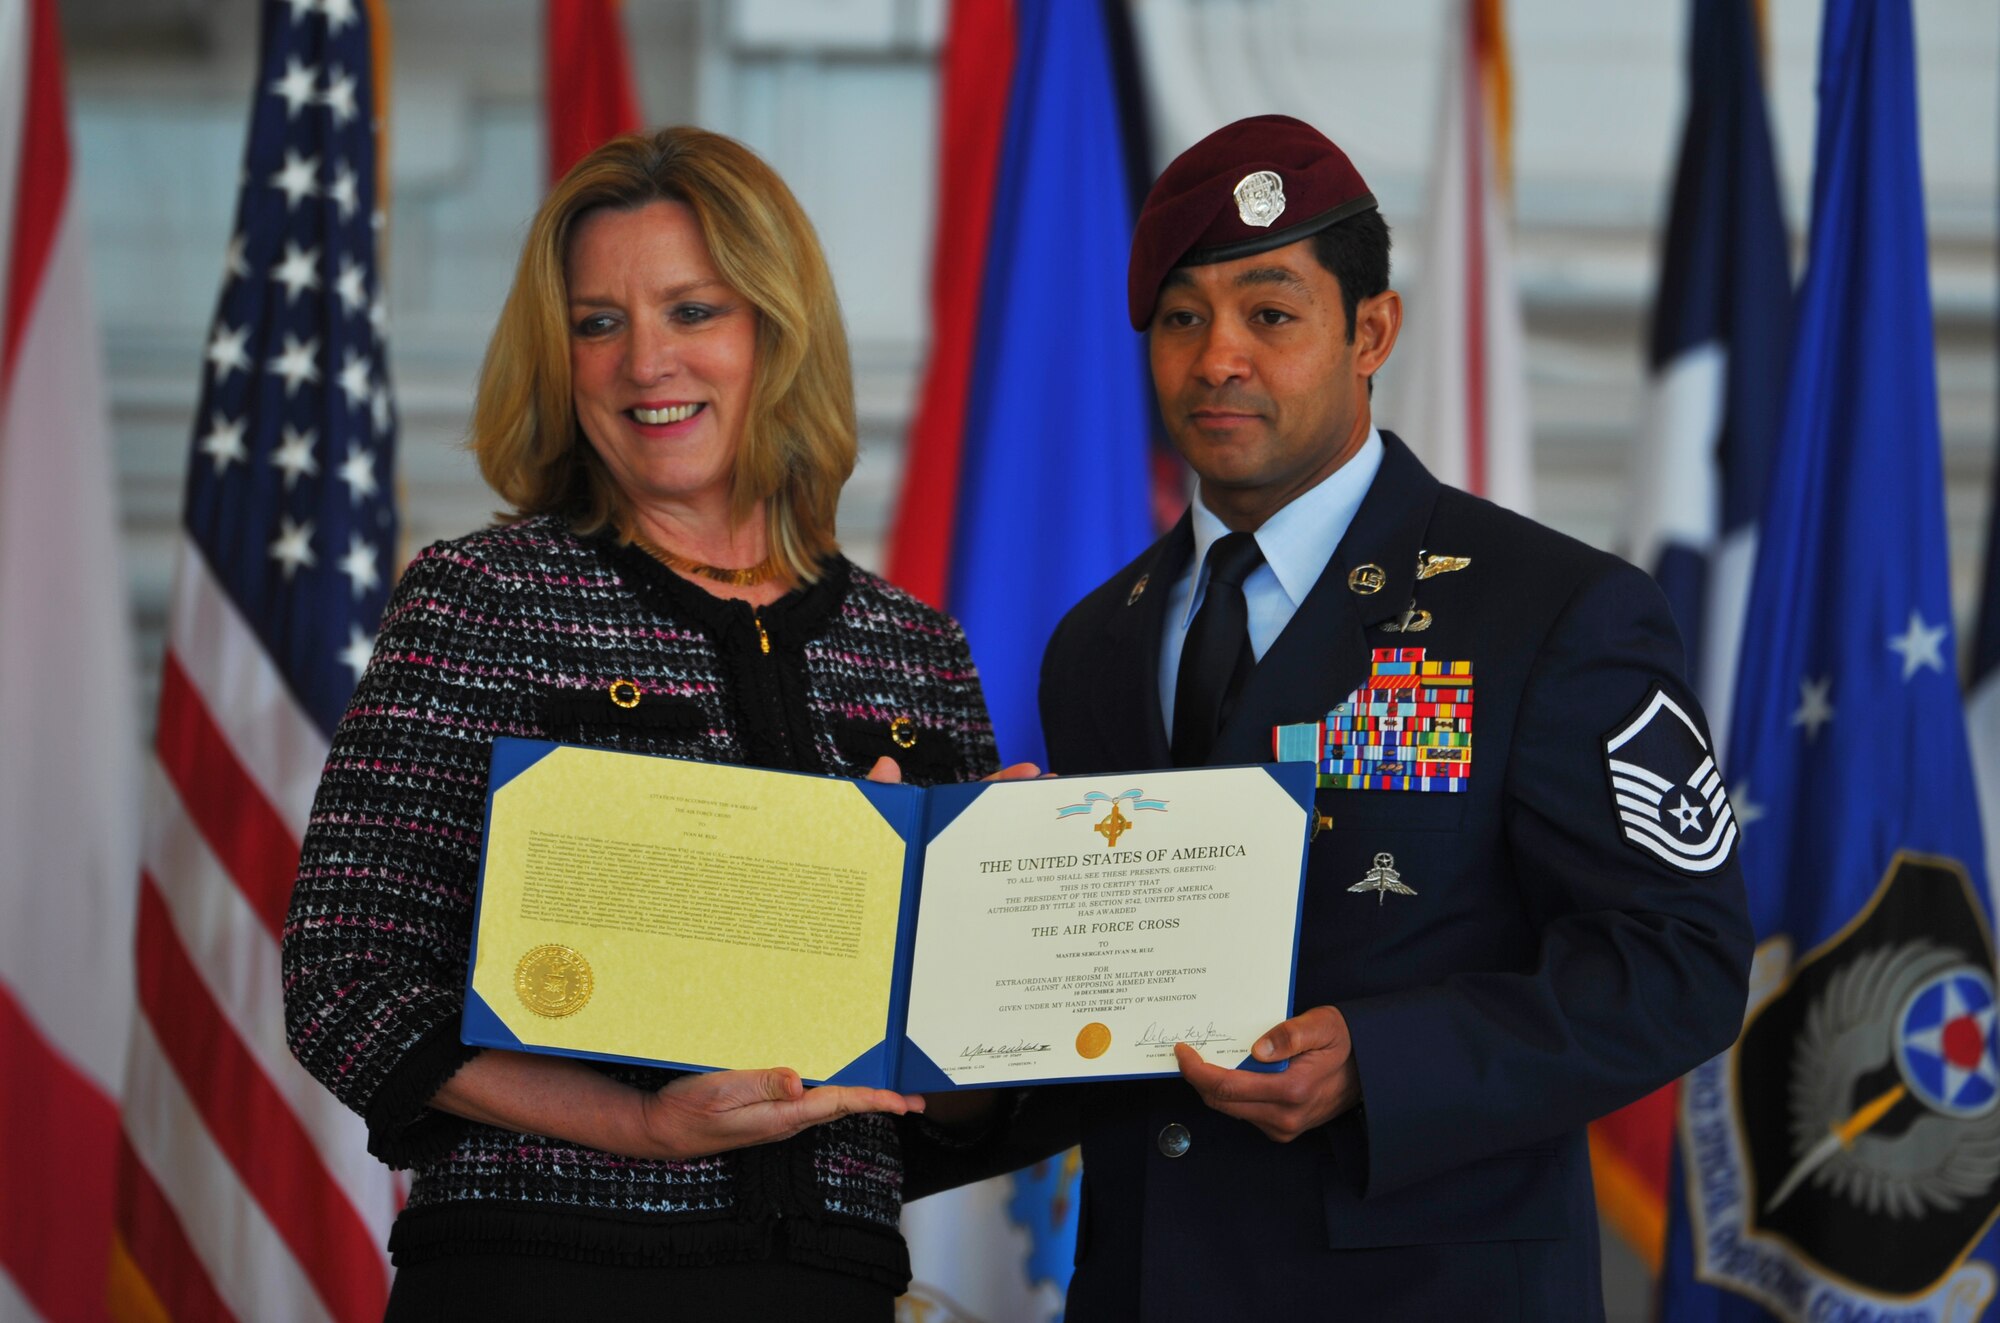 Master Sgt. Ivan Ruiz, a pararescueman from the 56th Rescue Squadron, Royal Air Force Lakenheath, England, displays his Air Force Cross citation with Secretary of the Air Force Deborah Lee James at the Freedom Hangar on Hurlburt Field, Fla., Dec 17, 2014. Ruiz earned the Air Force Cross while deployed with the 22nd Expeditionary Special Tactics Squadron, and assigned to the 23rd STS at Hurlburt Field, Fla. The last six Air Force Crosses have all been awarded to AFSOC Special Tactics Airmen.  (U.S. Air Force photo/Airman 1st Class Jeff Parkinson)